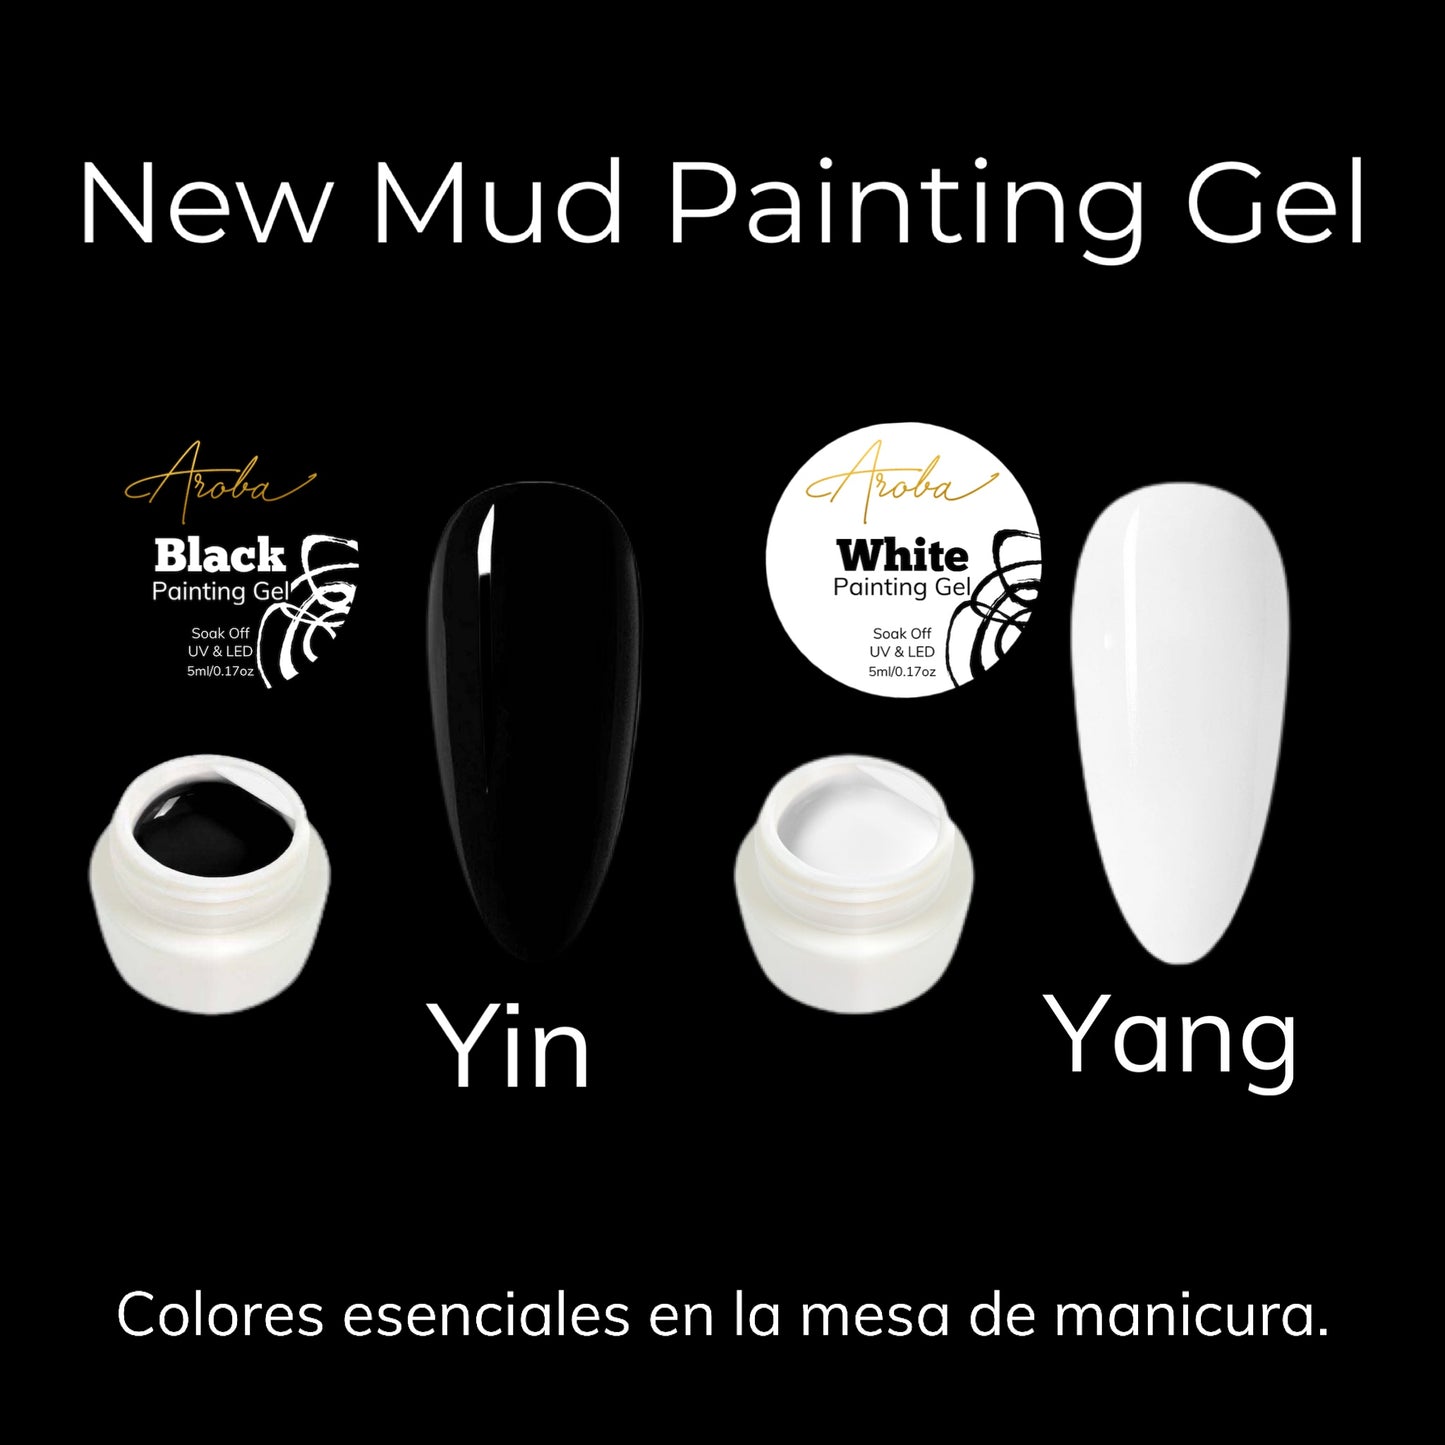 Black and White Painting Gel (LODO)